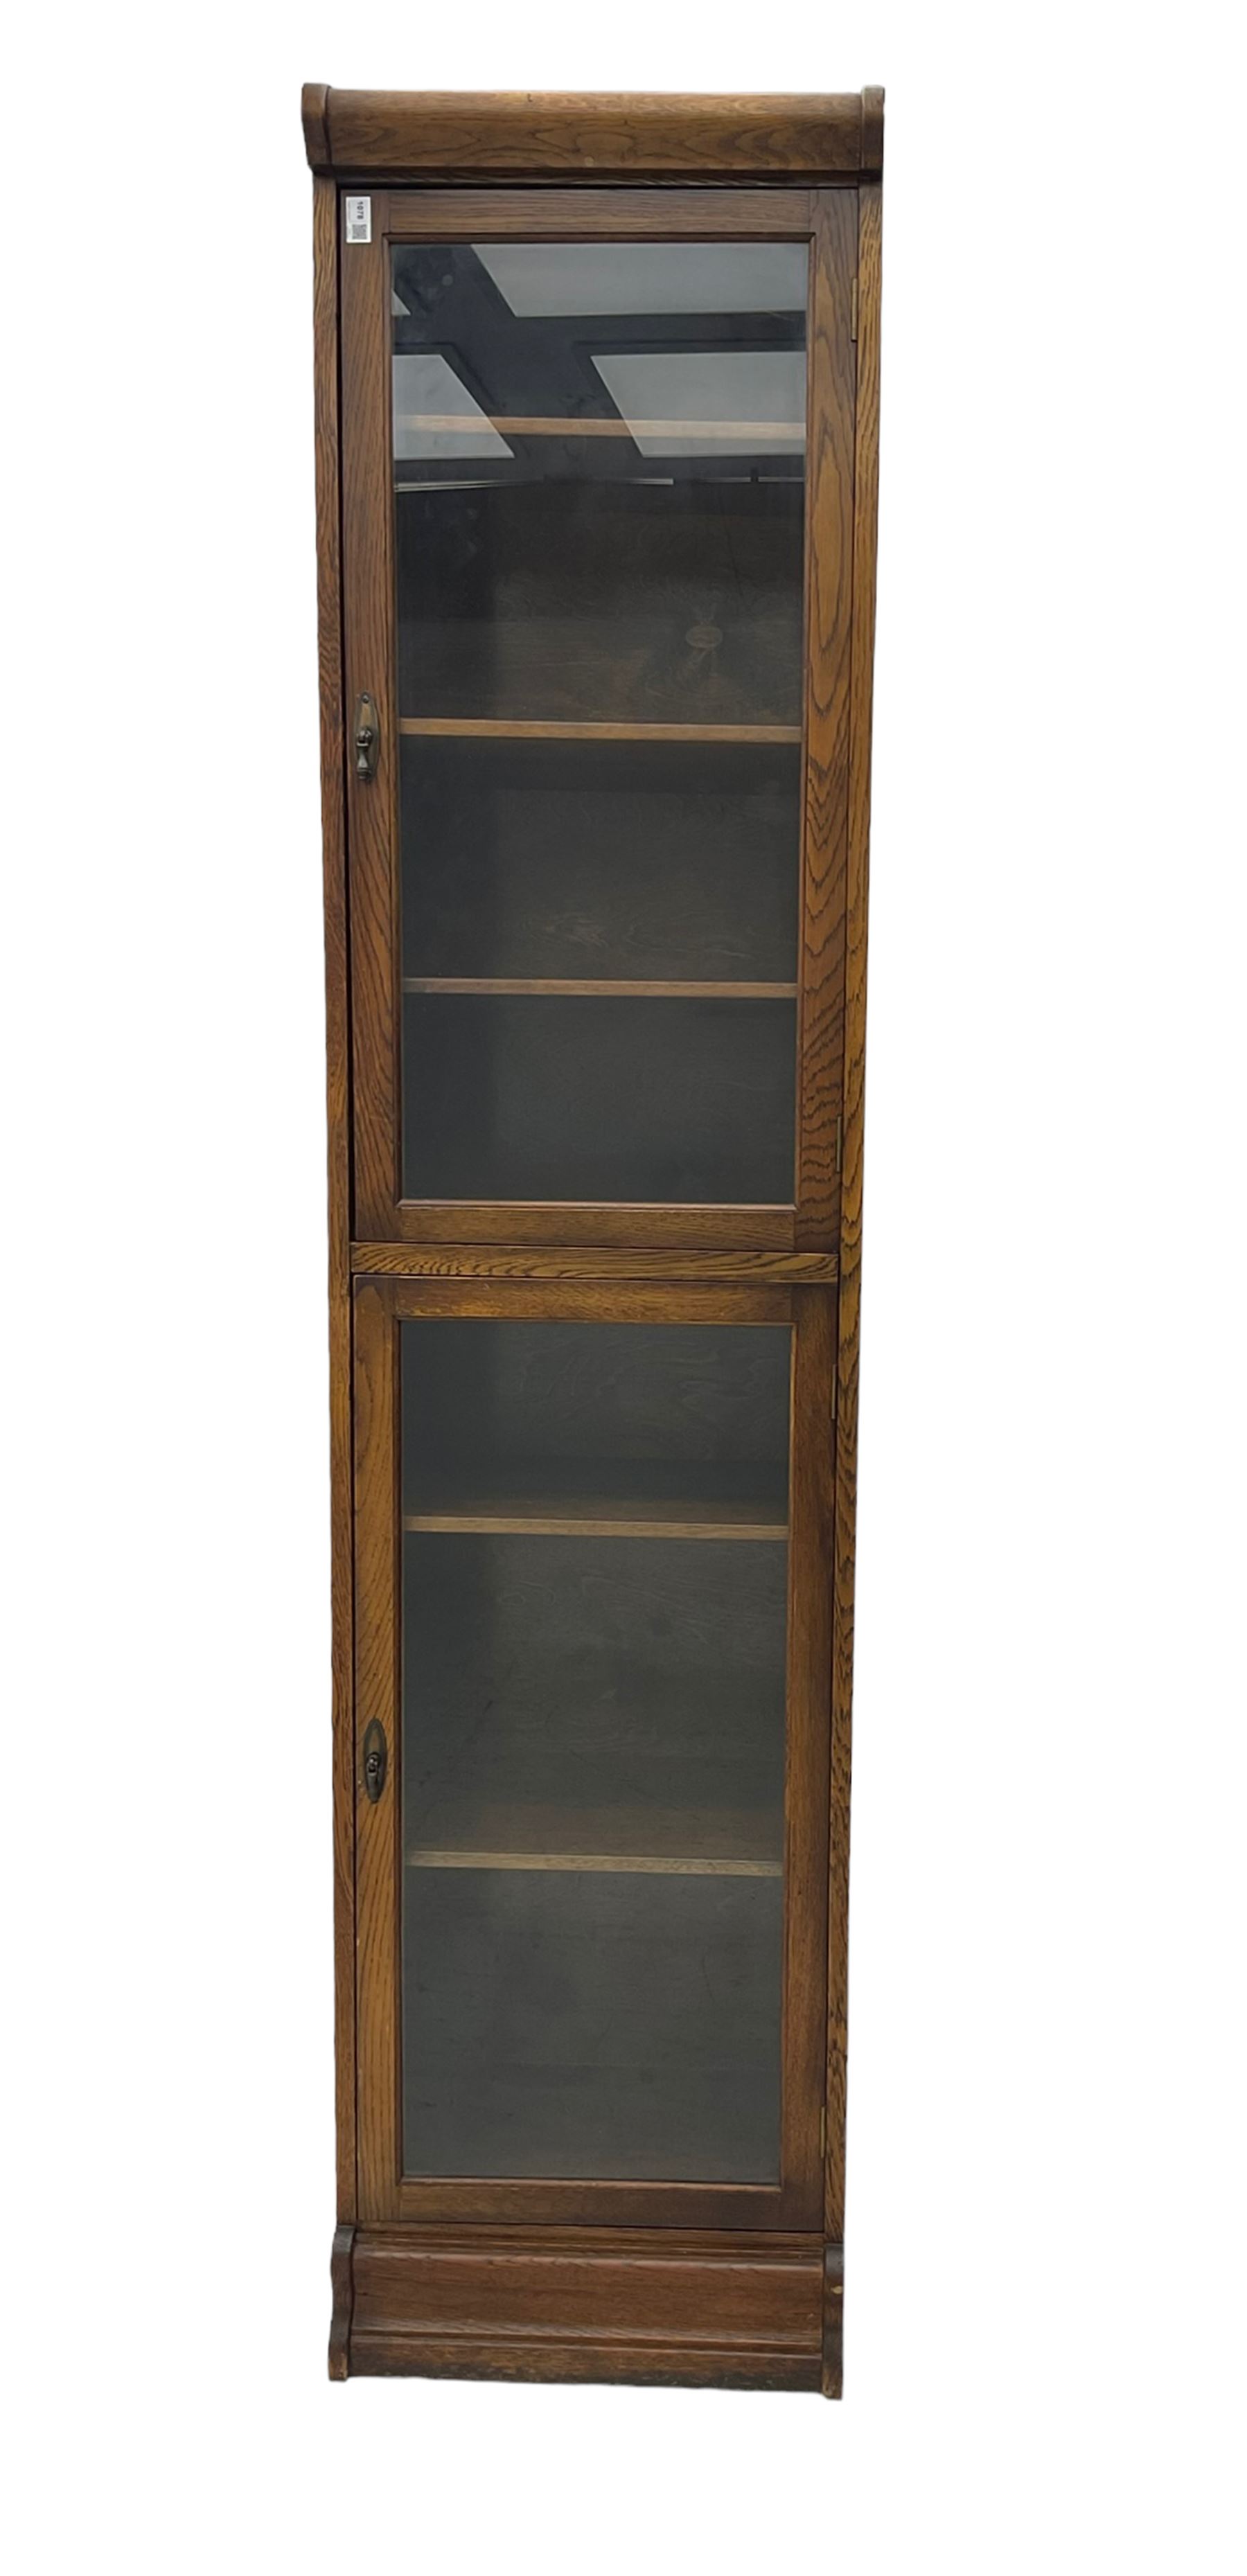 Early 20th century oak library bookcase - Image 8 of 8